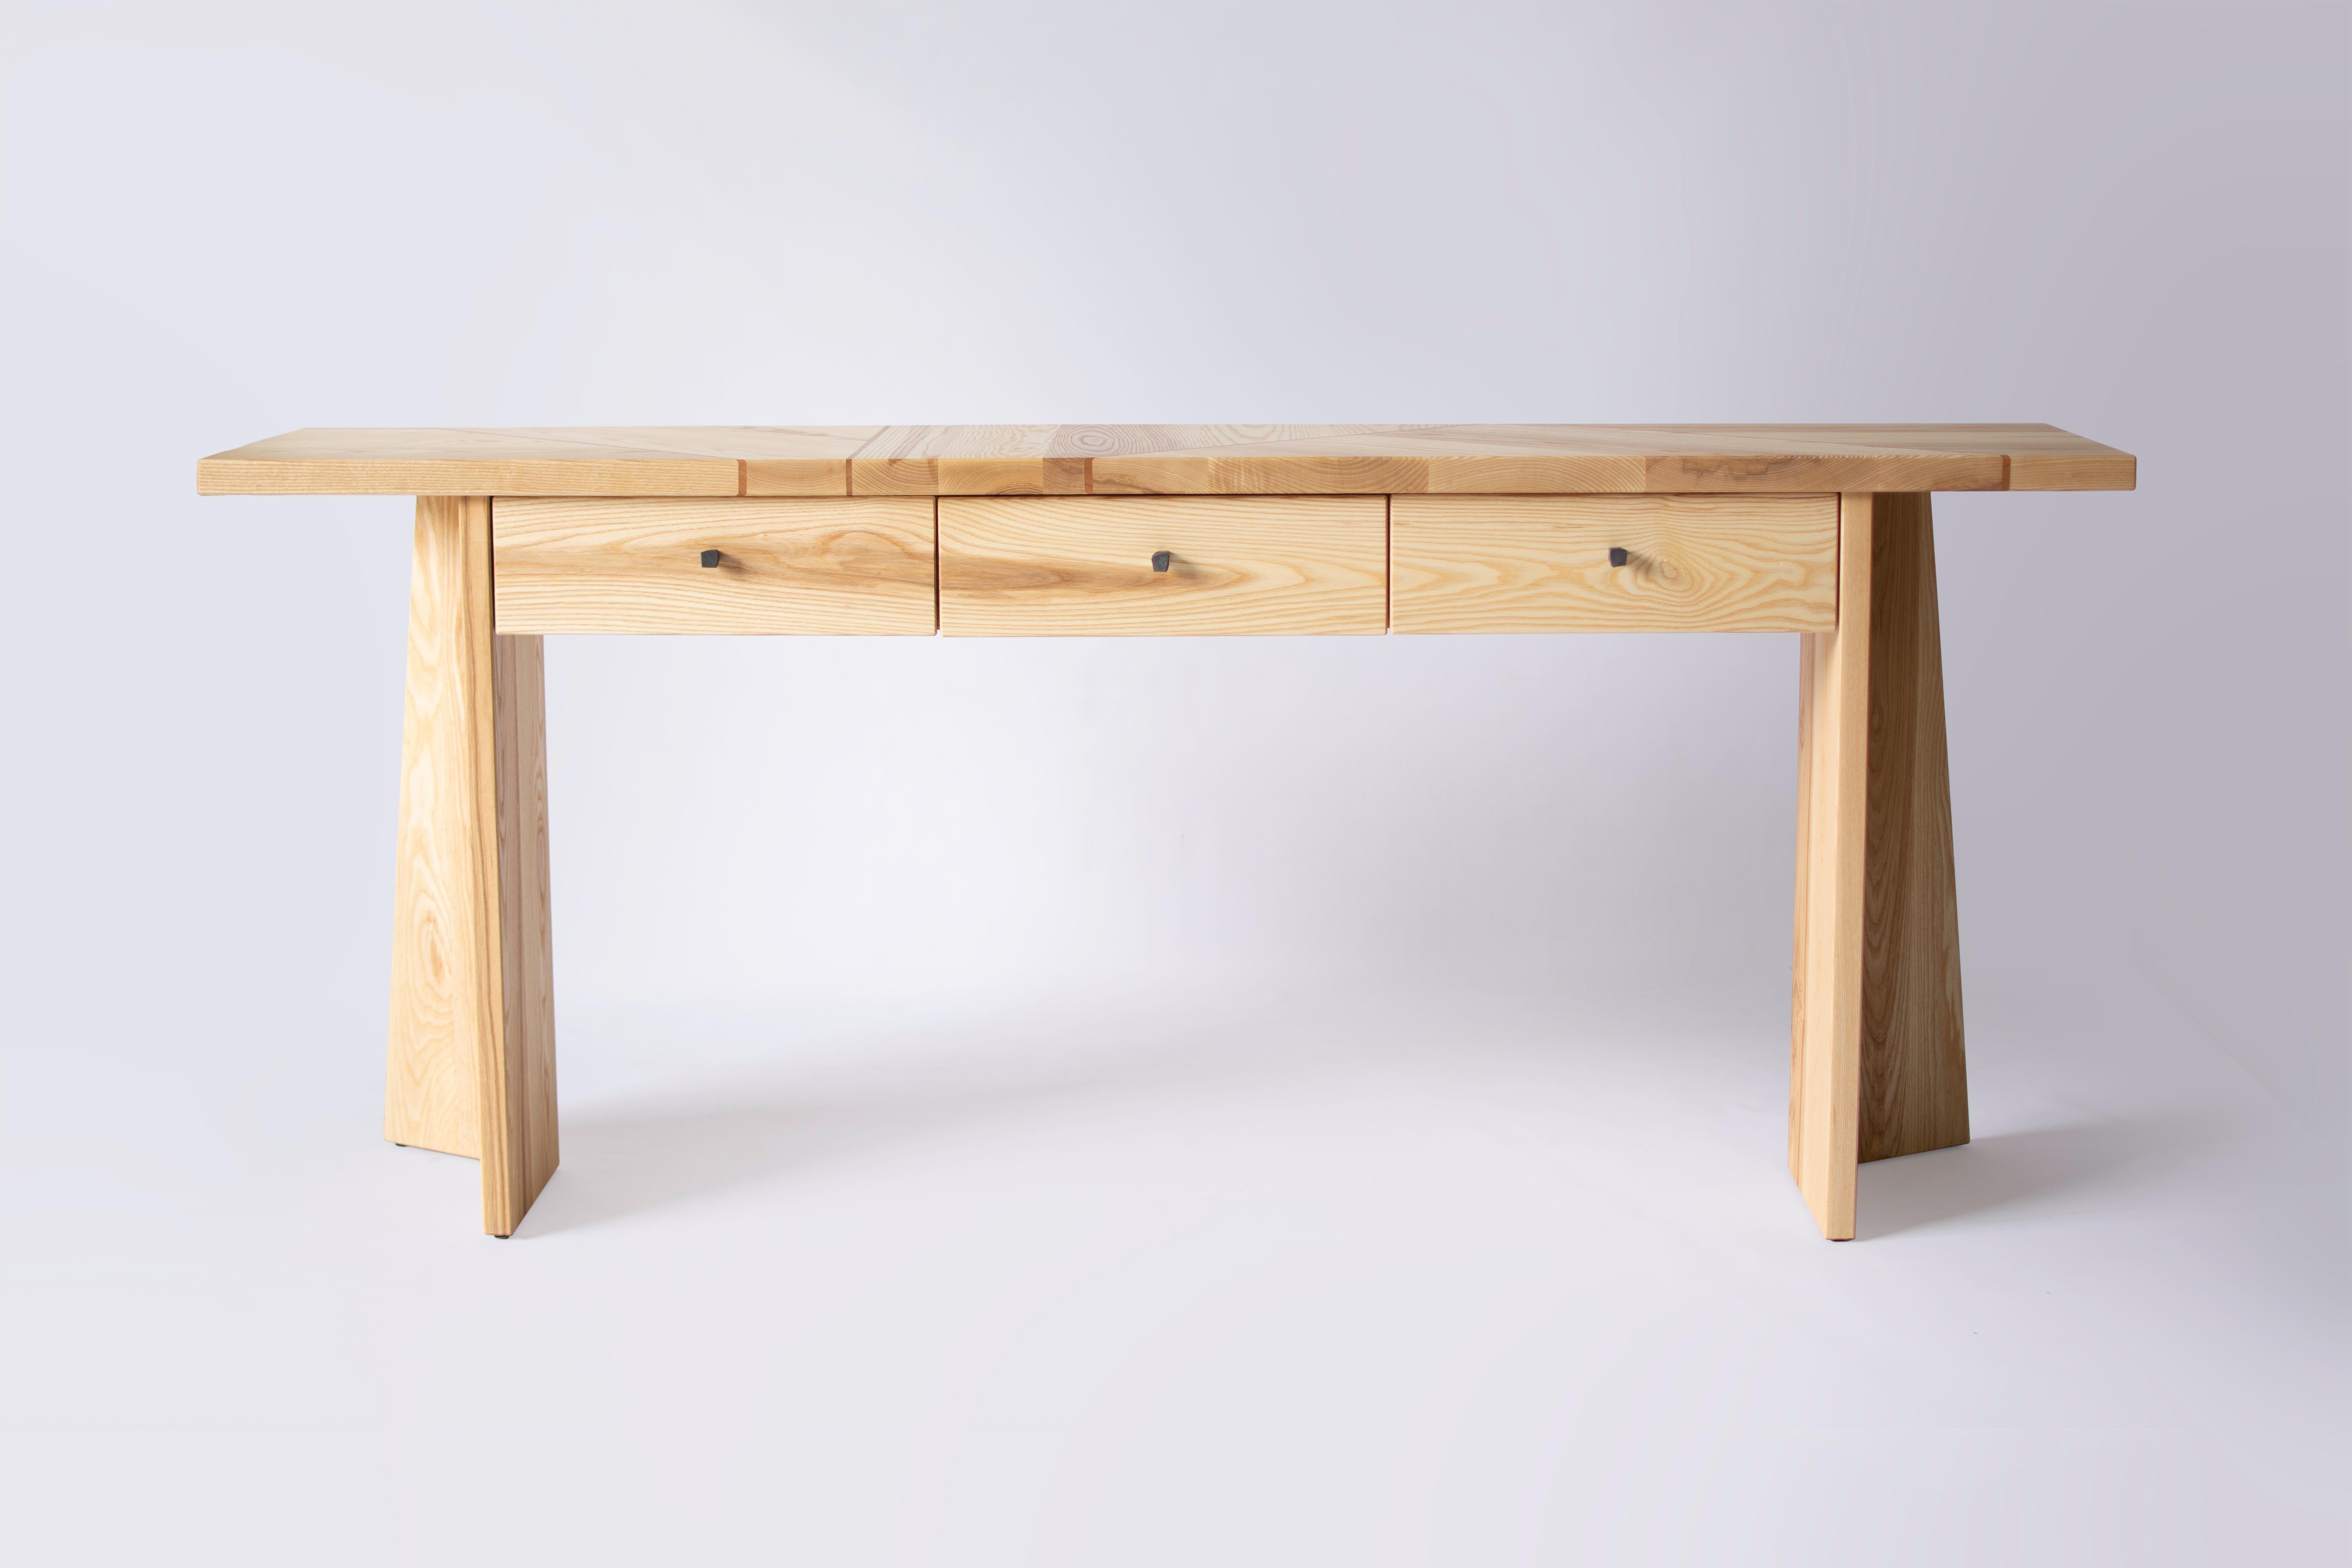 Angular slabs of solid ash are joined together with thin strips of cherry in order to form the butcher block style top for the Wedge table. The three small drawers are perfect for storing utensils and bar paraphernalia, while the open design of the